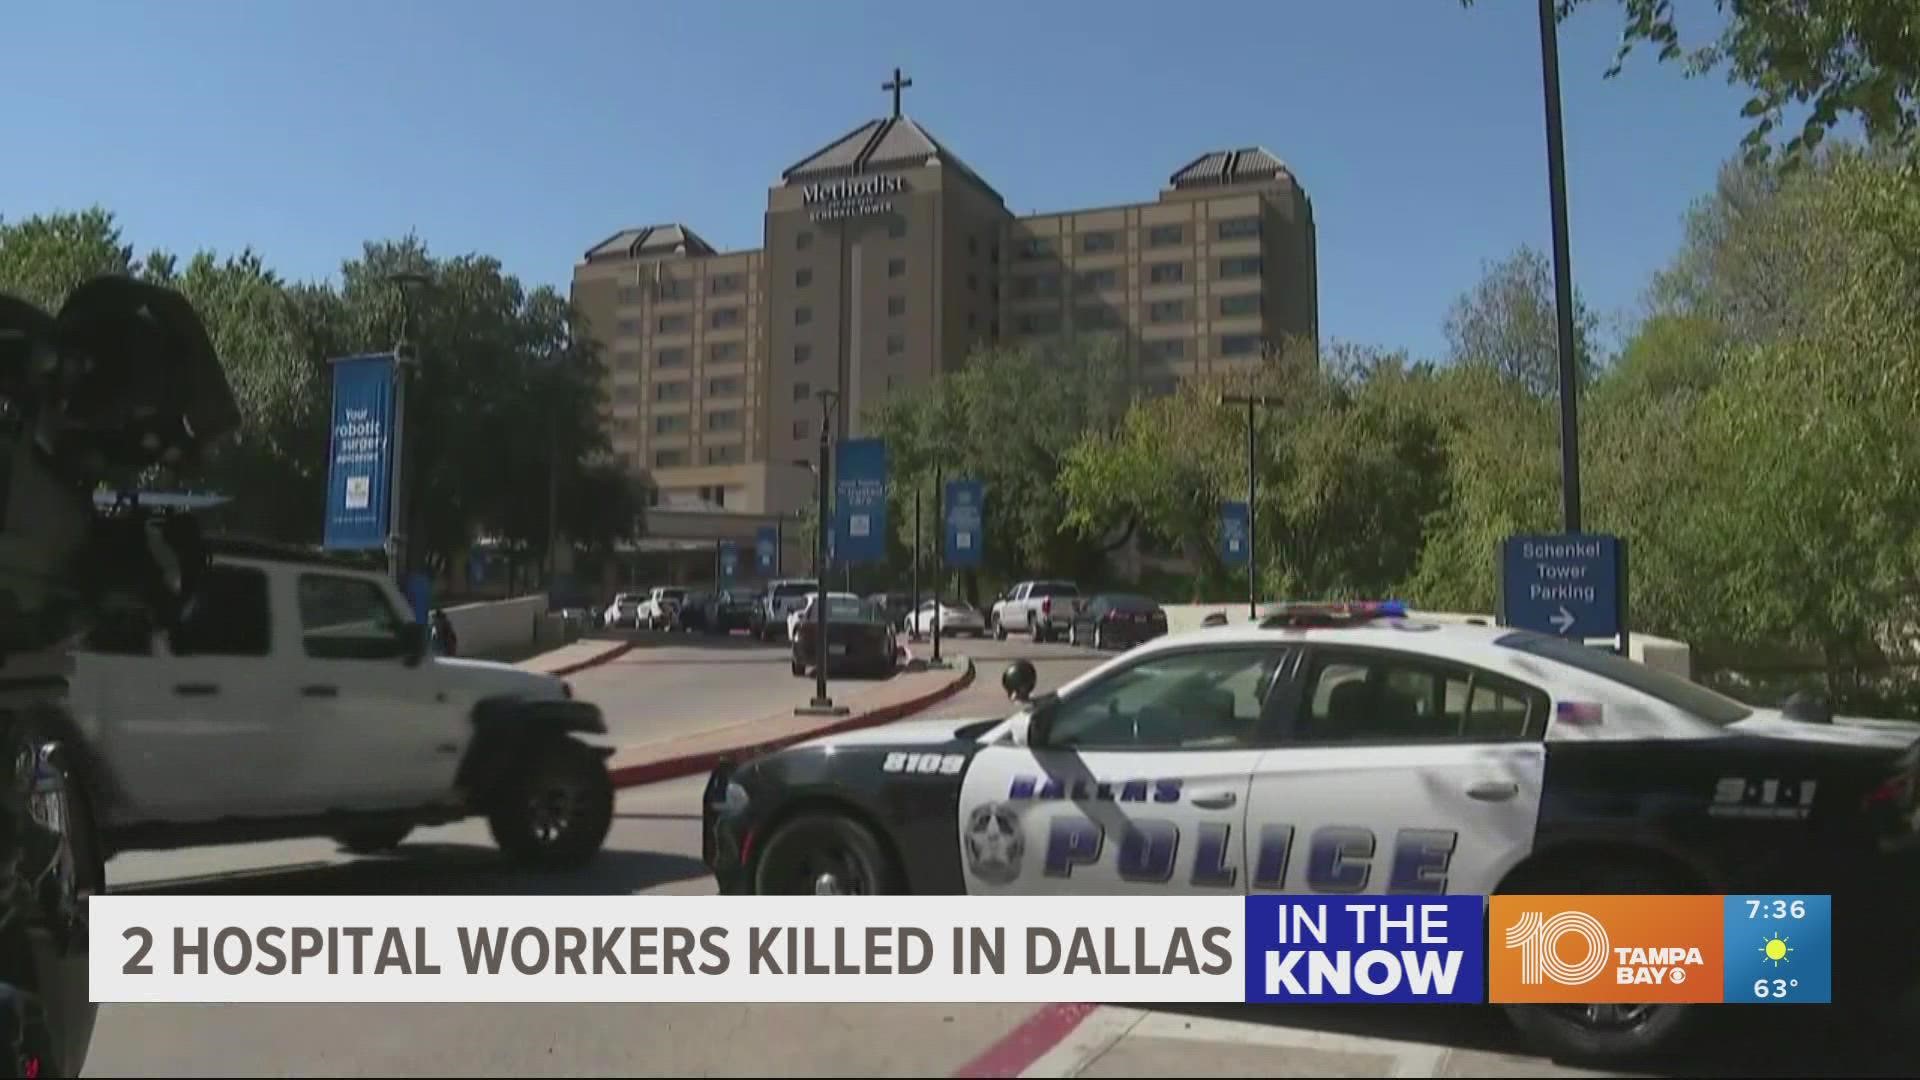 One suspect is in custody and two employees — including at least one nurse — have died from gunshot wounds, officials at Methodist Hospital in Oak Cliff said.